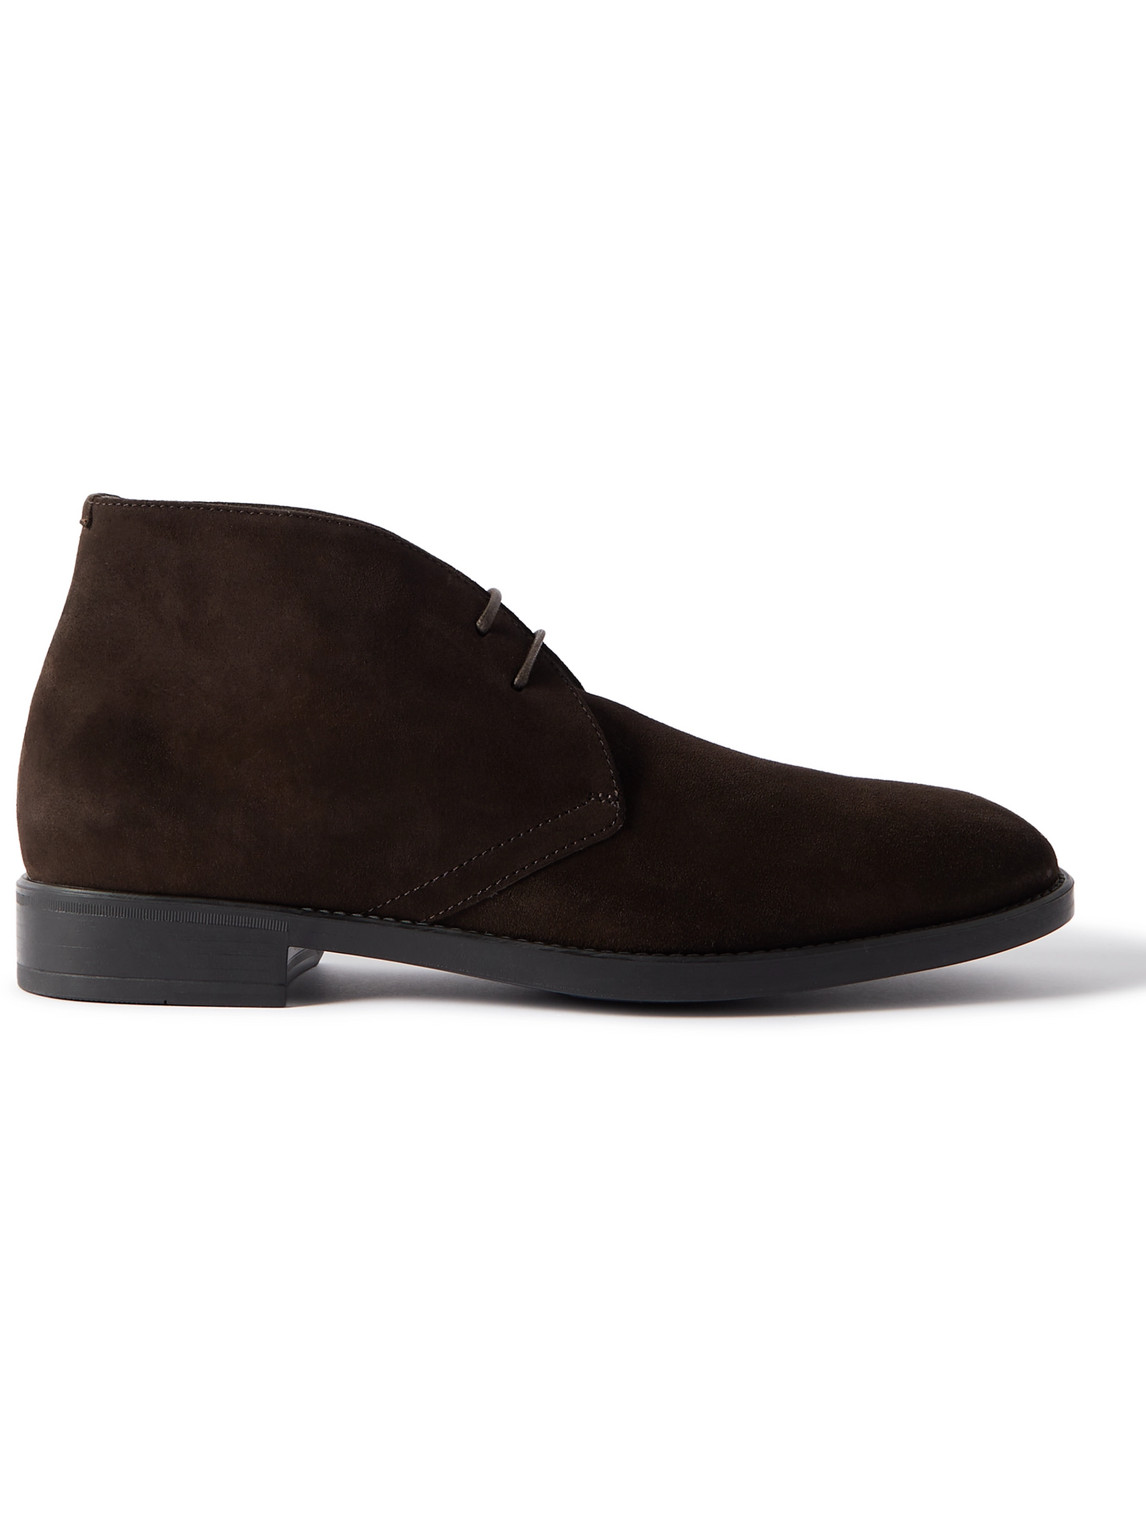 TOM FORD ROBERT SUEDE CHUKKA BOOTS